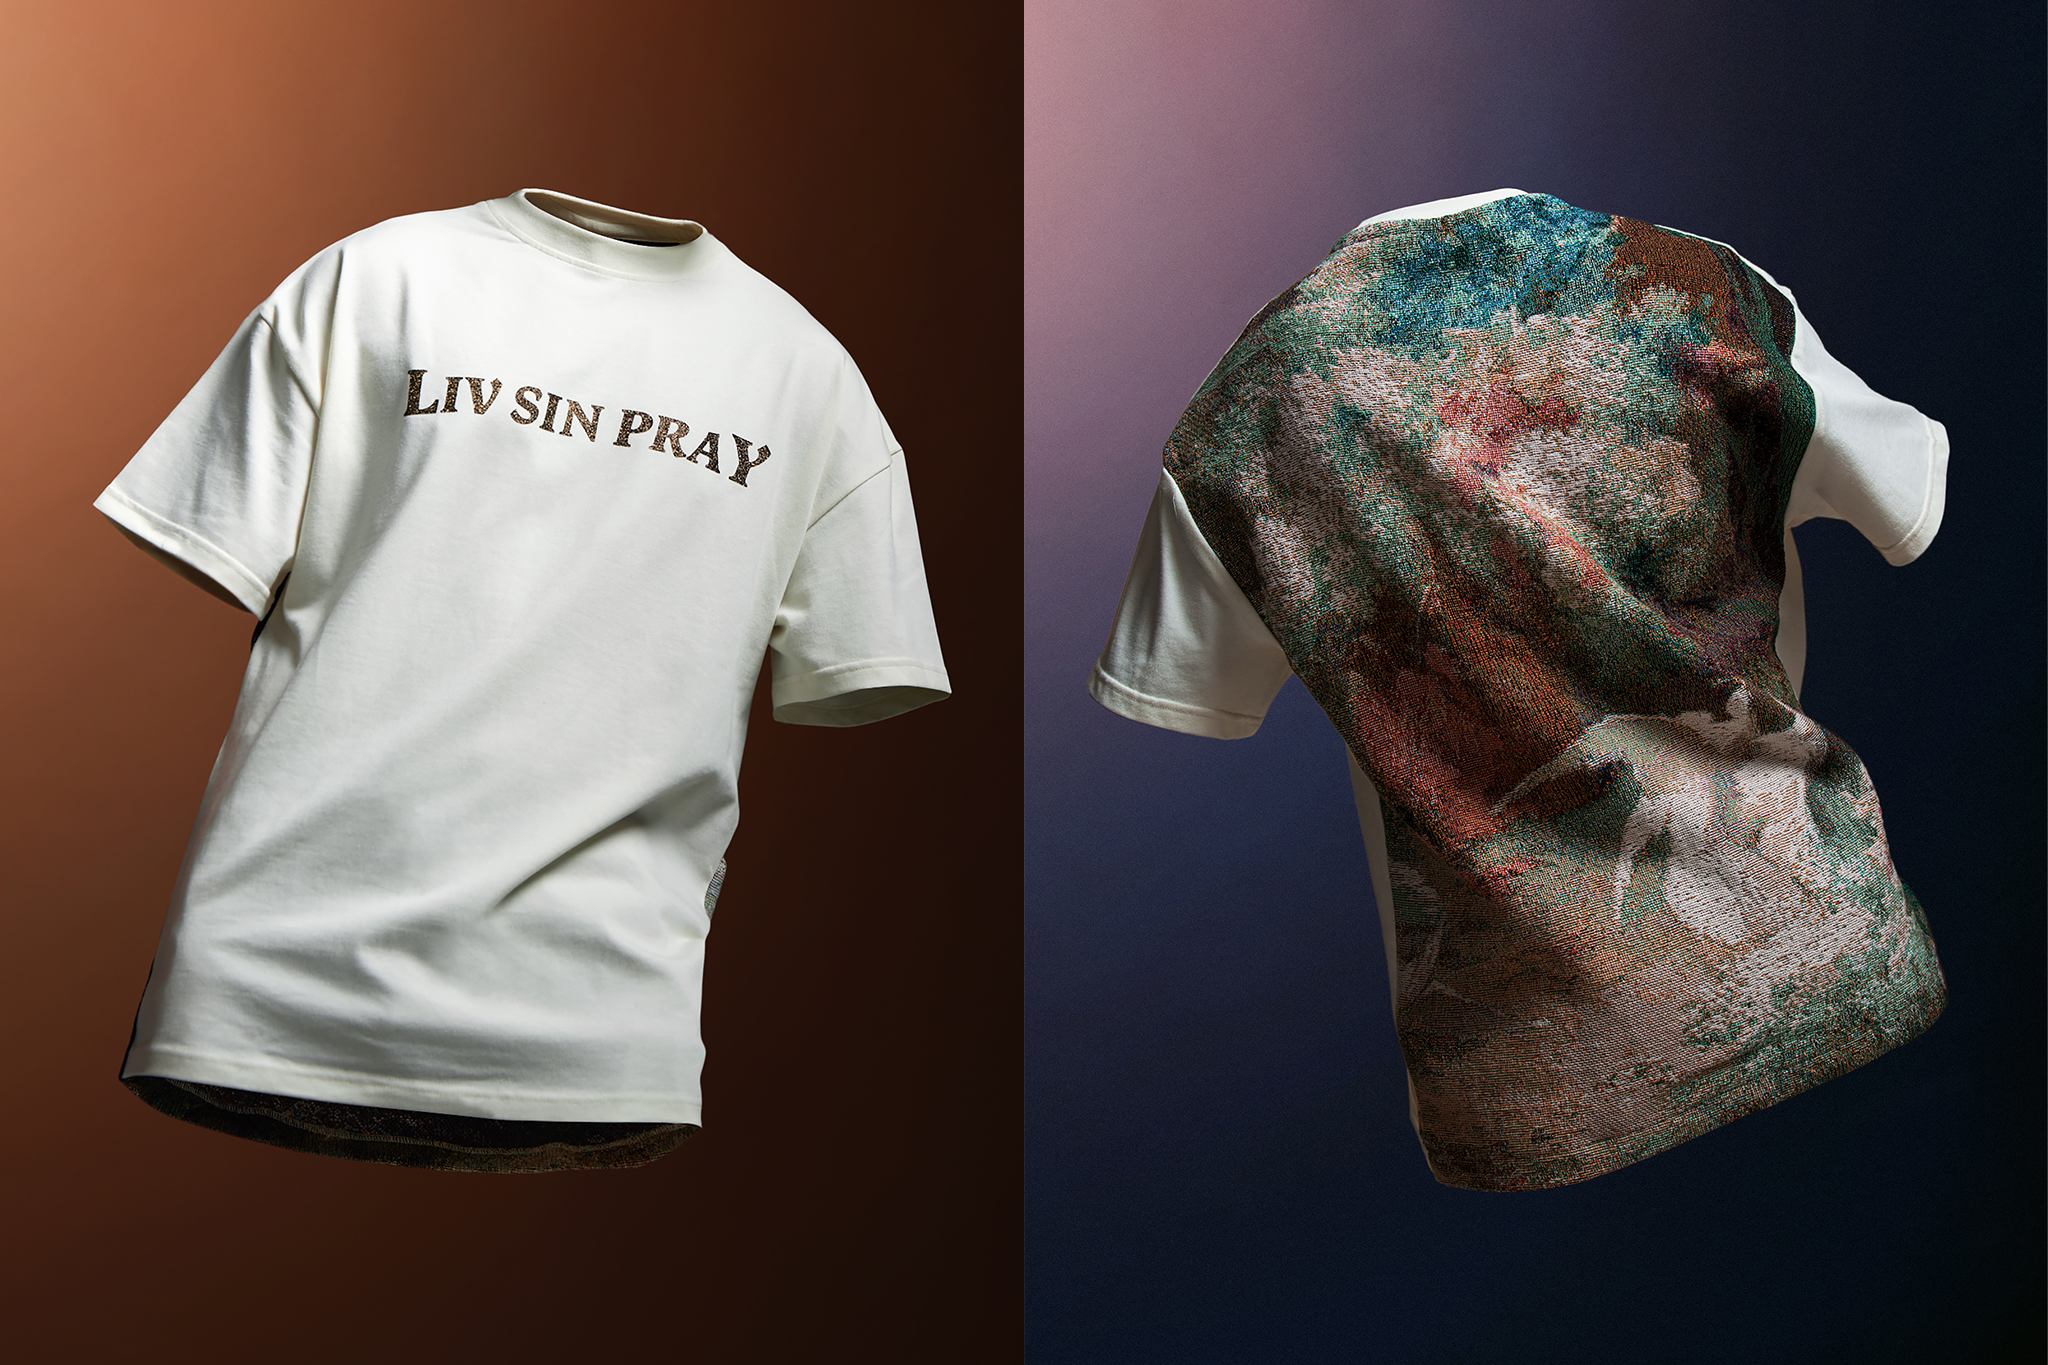 LIV SIN PRAY Capture the Quintessence of ‘Le Printemps’ in Debut Collection